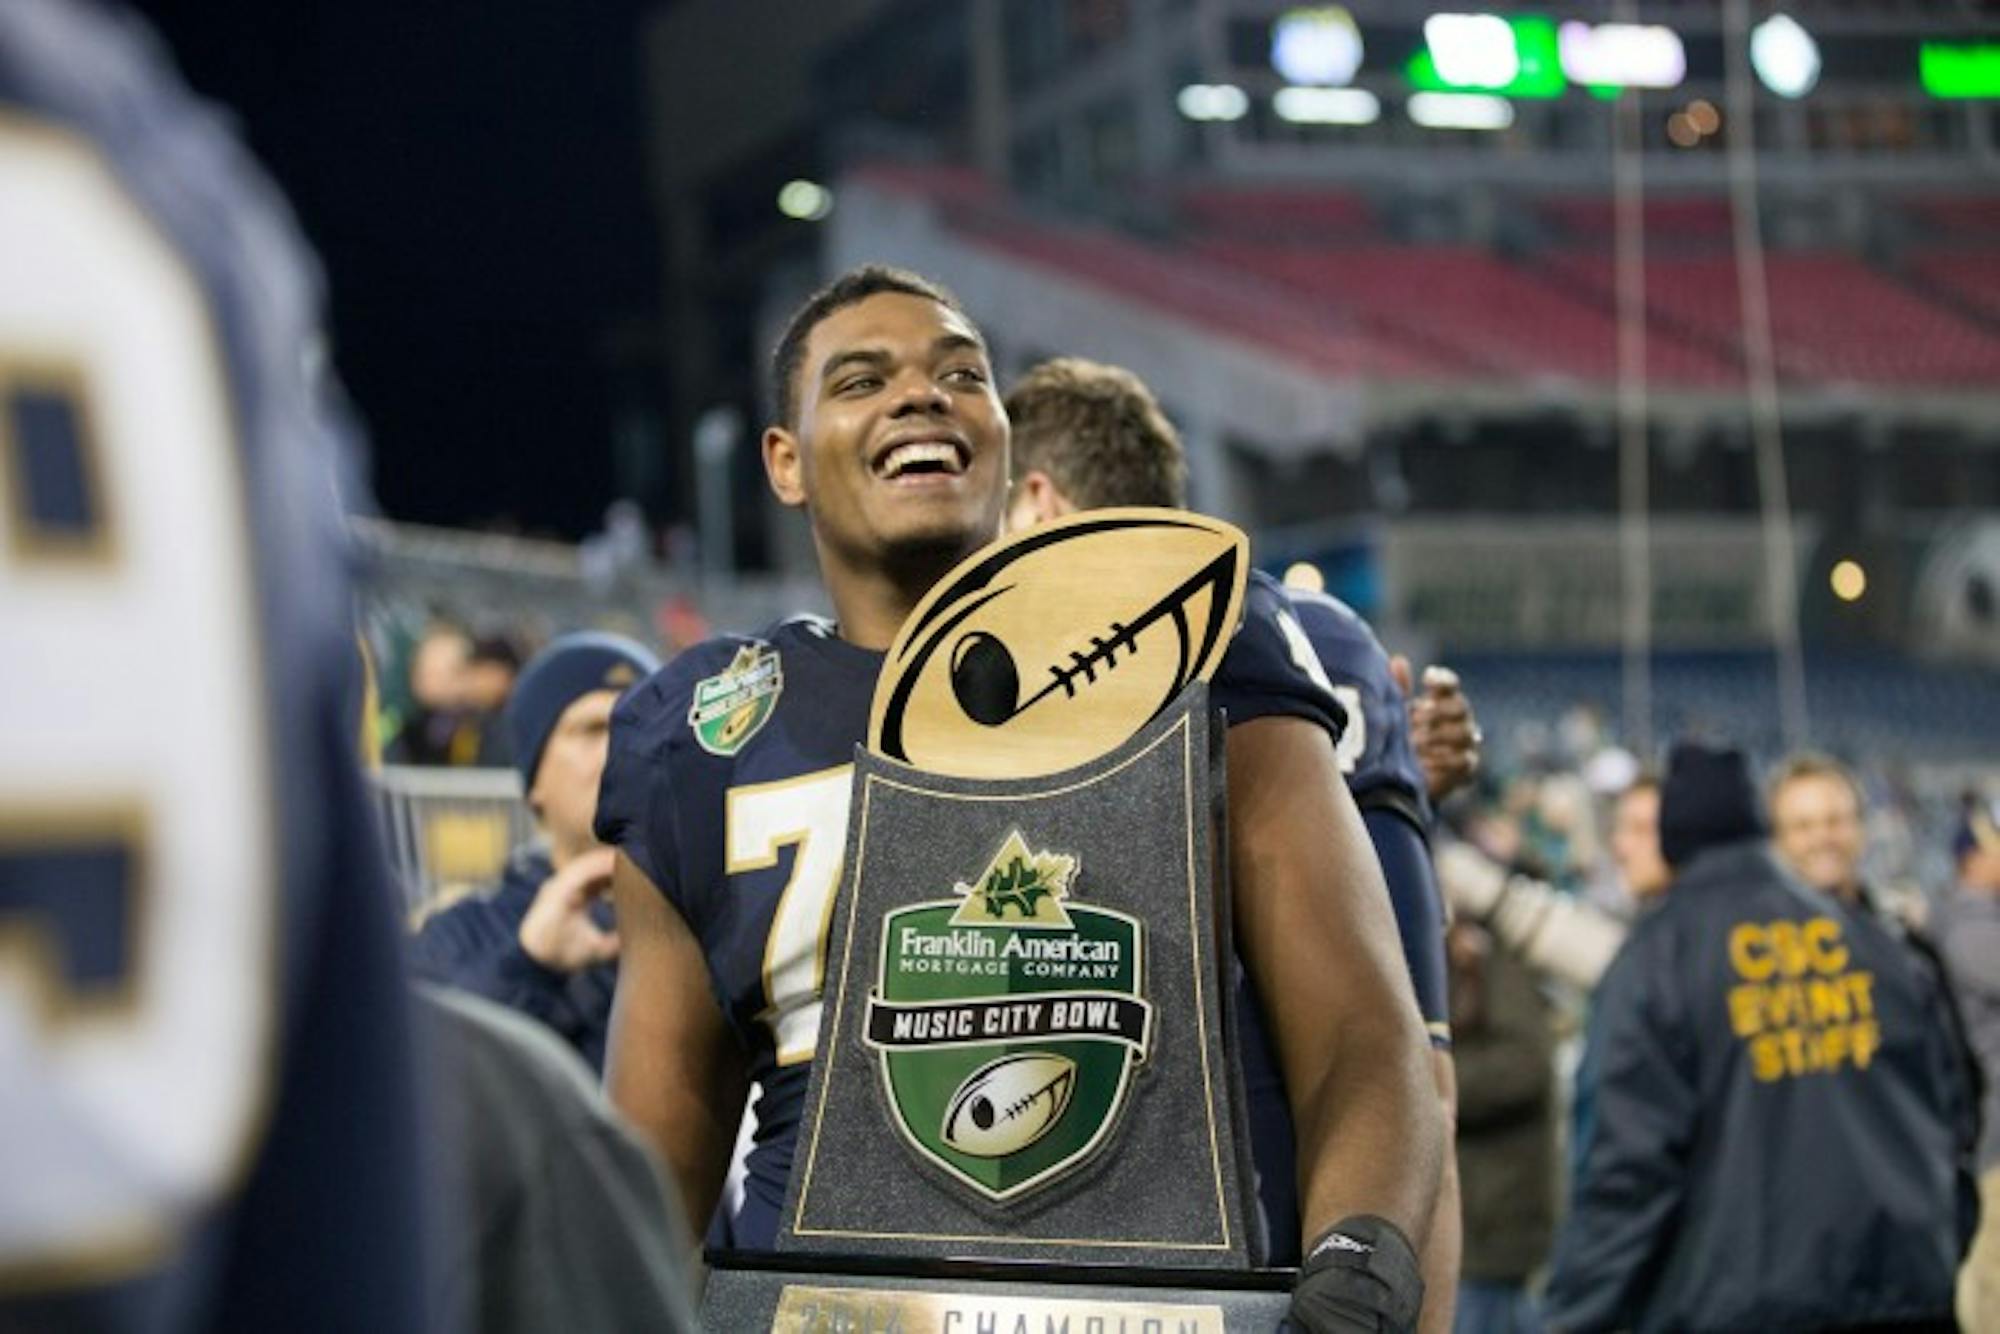 Irish offensive lineman Ronnie Stanley celebrates Notre Dame's 31-28 victory over LSU at the Franklin American Mortgage Music City Bowl at LP Field on Dec. 30, 2014. Stanley was Notre Dame's first offensive tackle drafted in the first round of the NFL Draft since Luke Petitgout was drafted No. 19 overall by the New York Giants in 1999.